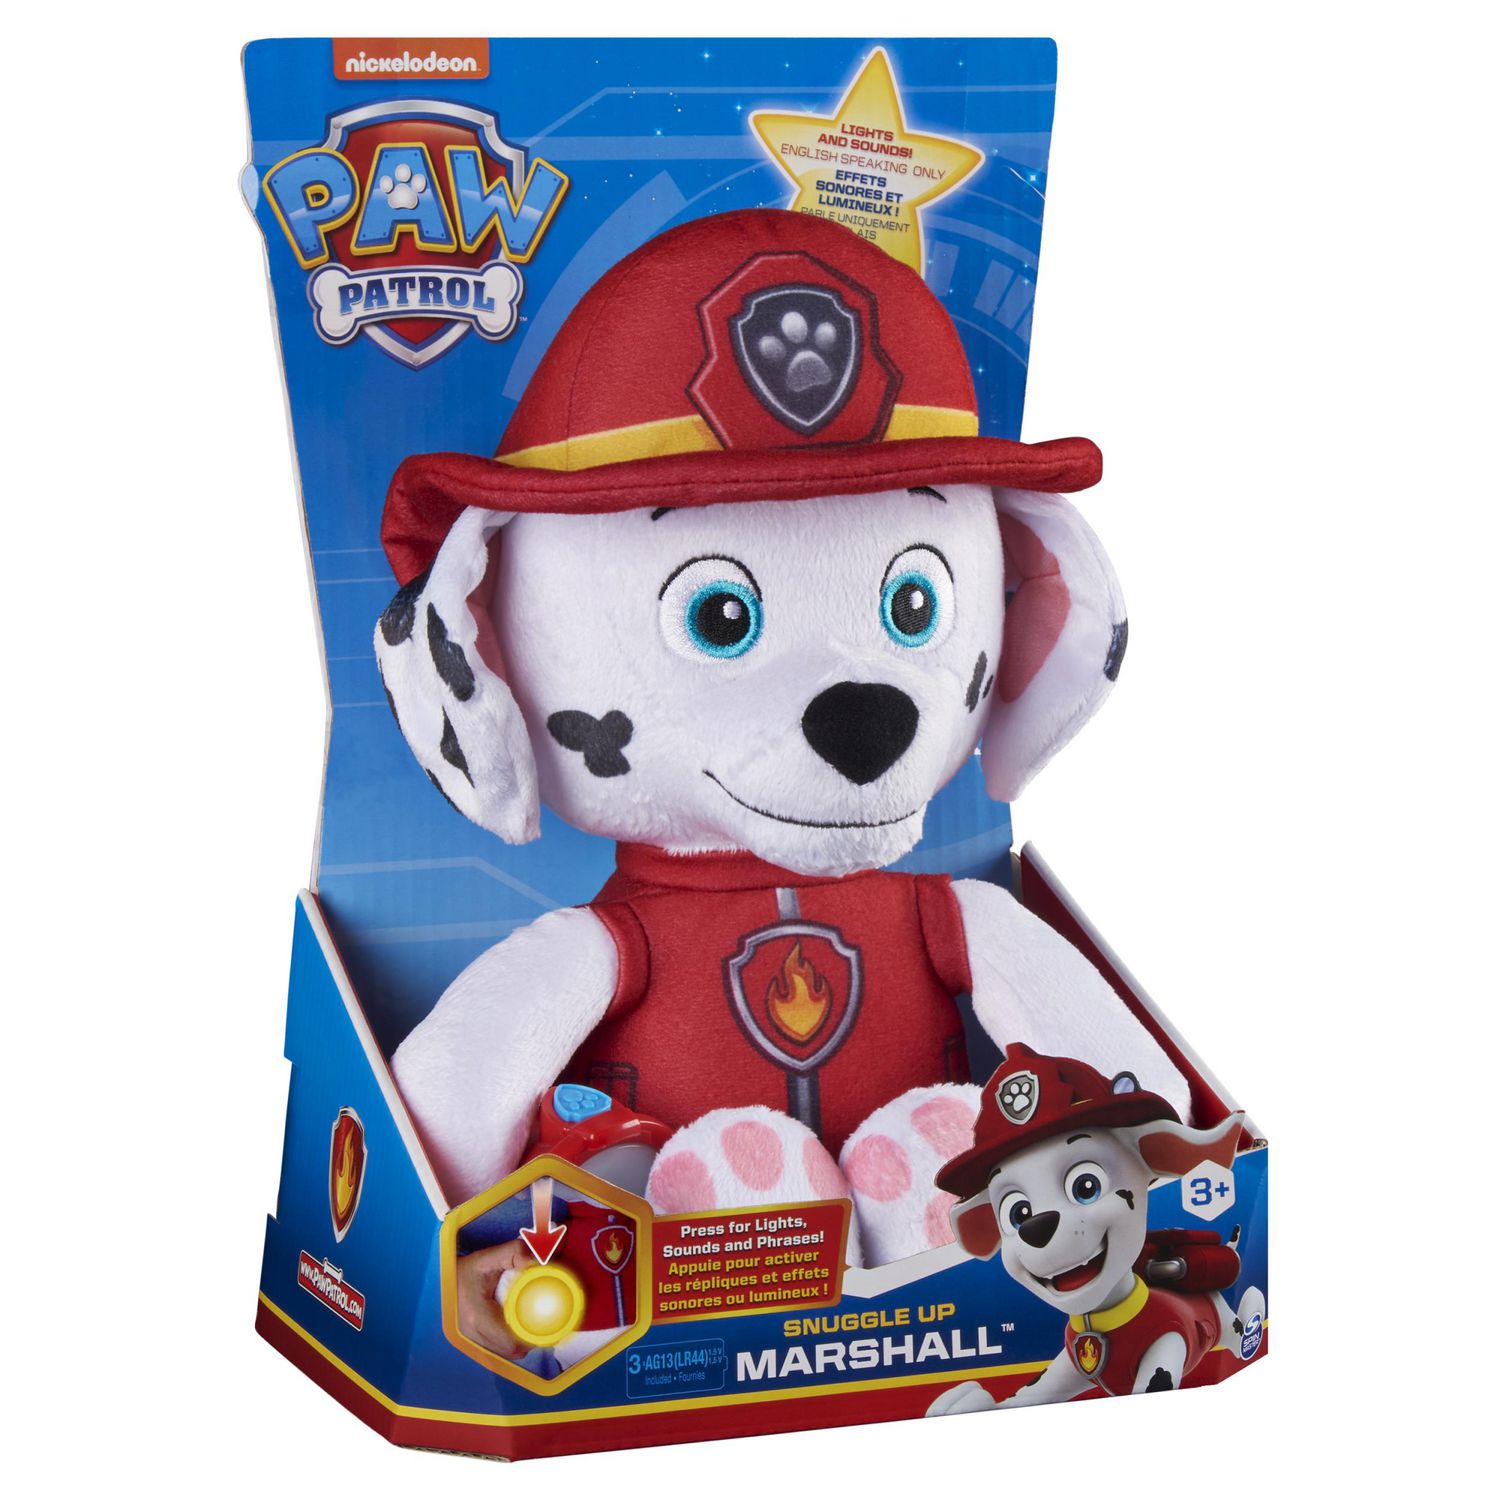 PAW Patrol, Snuggle Up Marshall Plush with Flashlight and Sounds